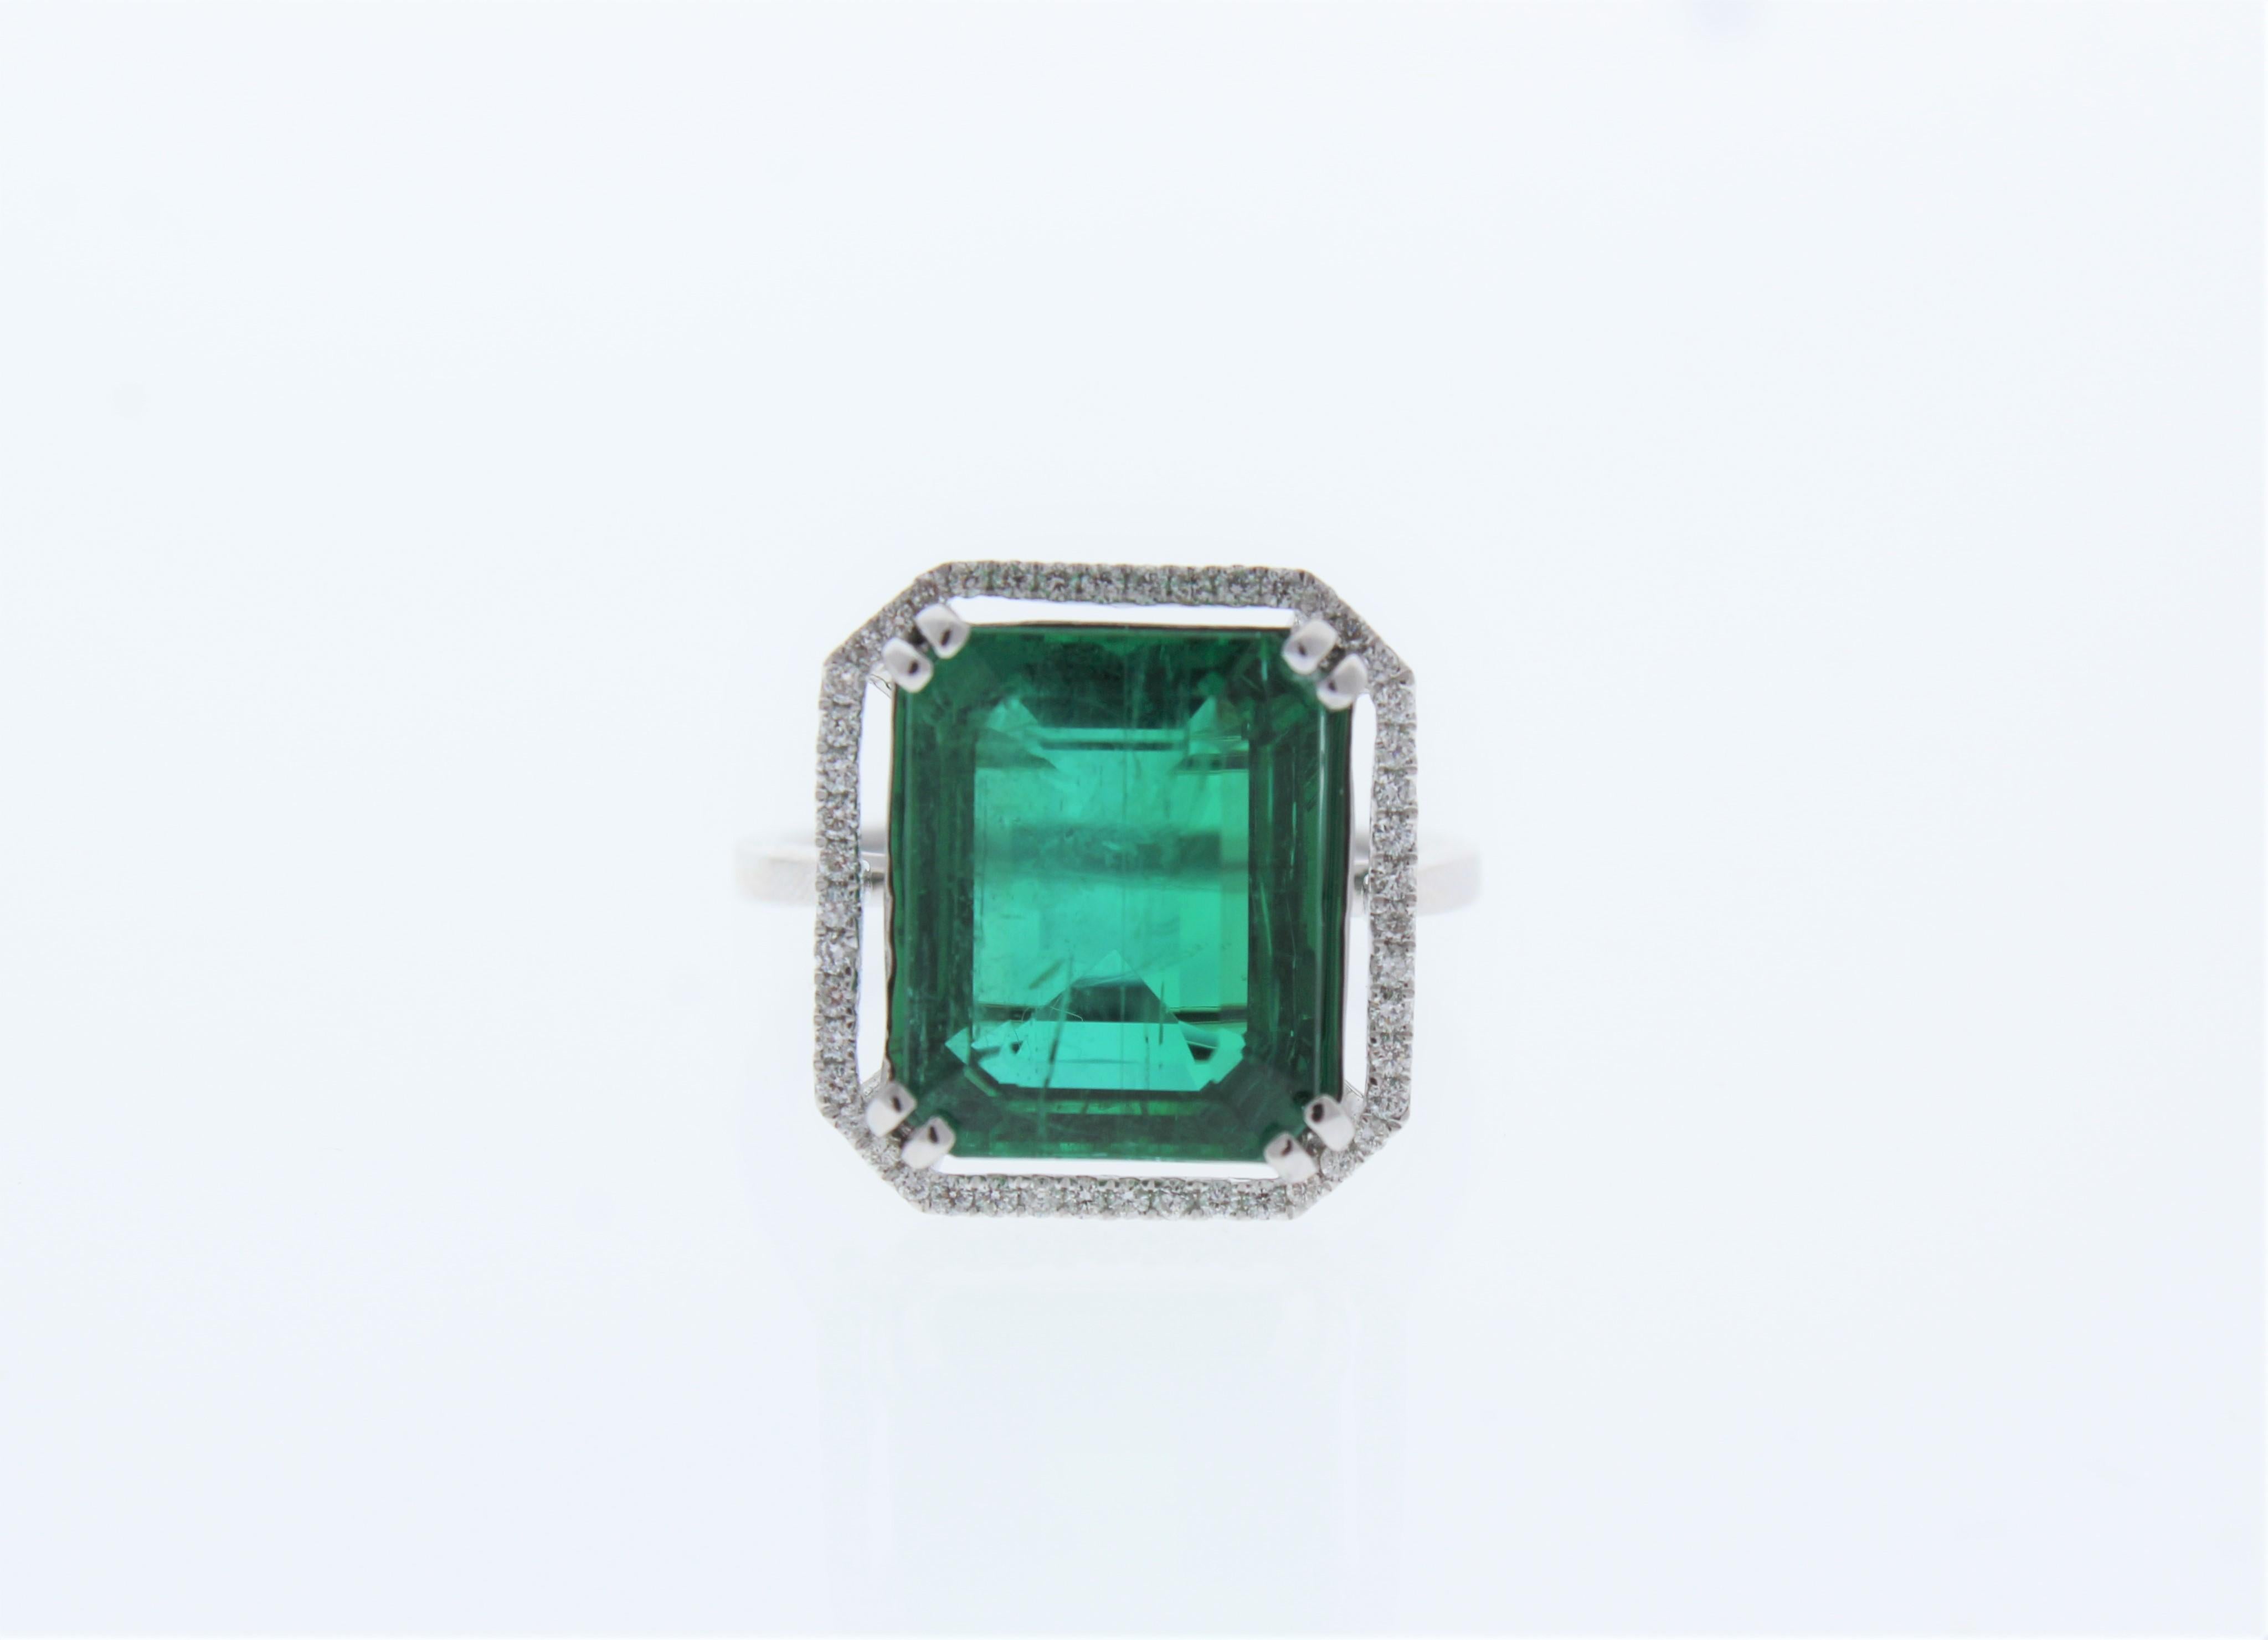 This is a 8.24 carat emerald cut, grass-green emerald. Sparkling round brilliant cut diamonds double-frame this center gem, creating a cluster halo totaling .25 carats. A slim, diamond split-shank band adds comfort and style to this extravagant